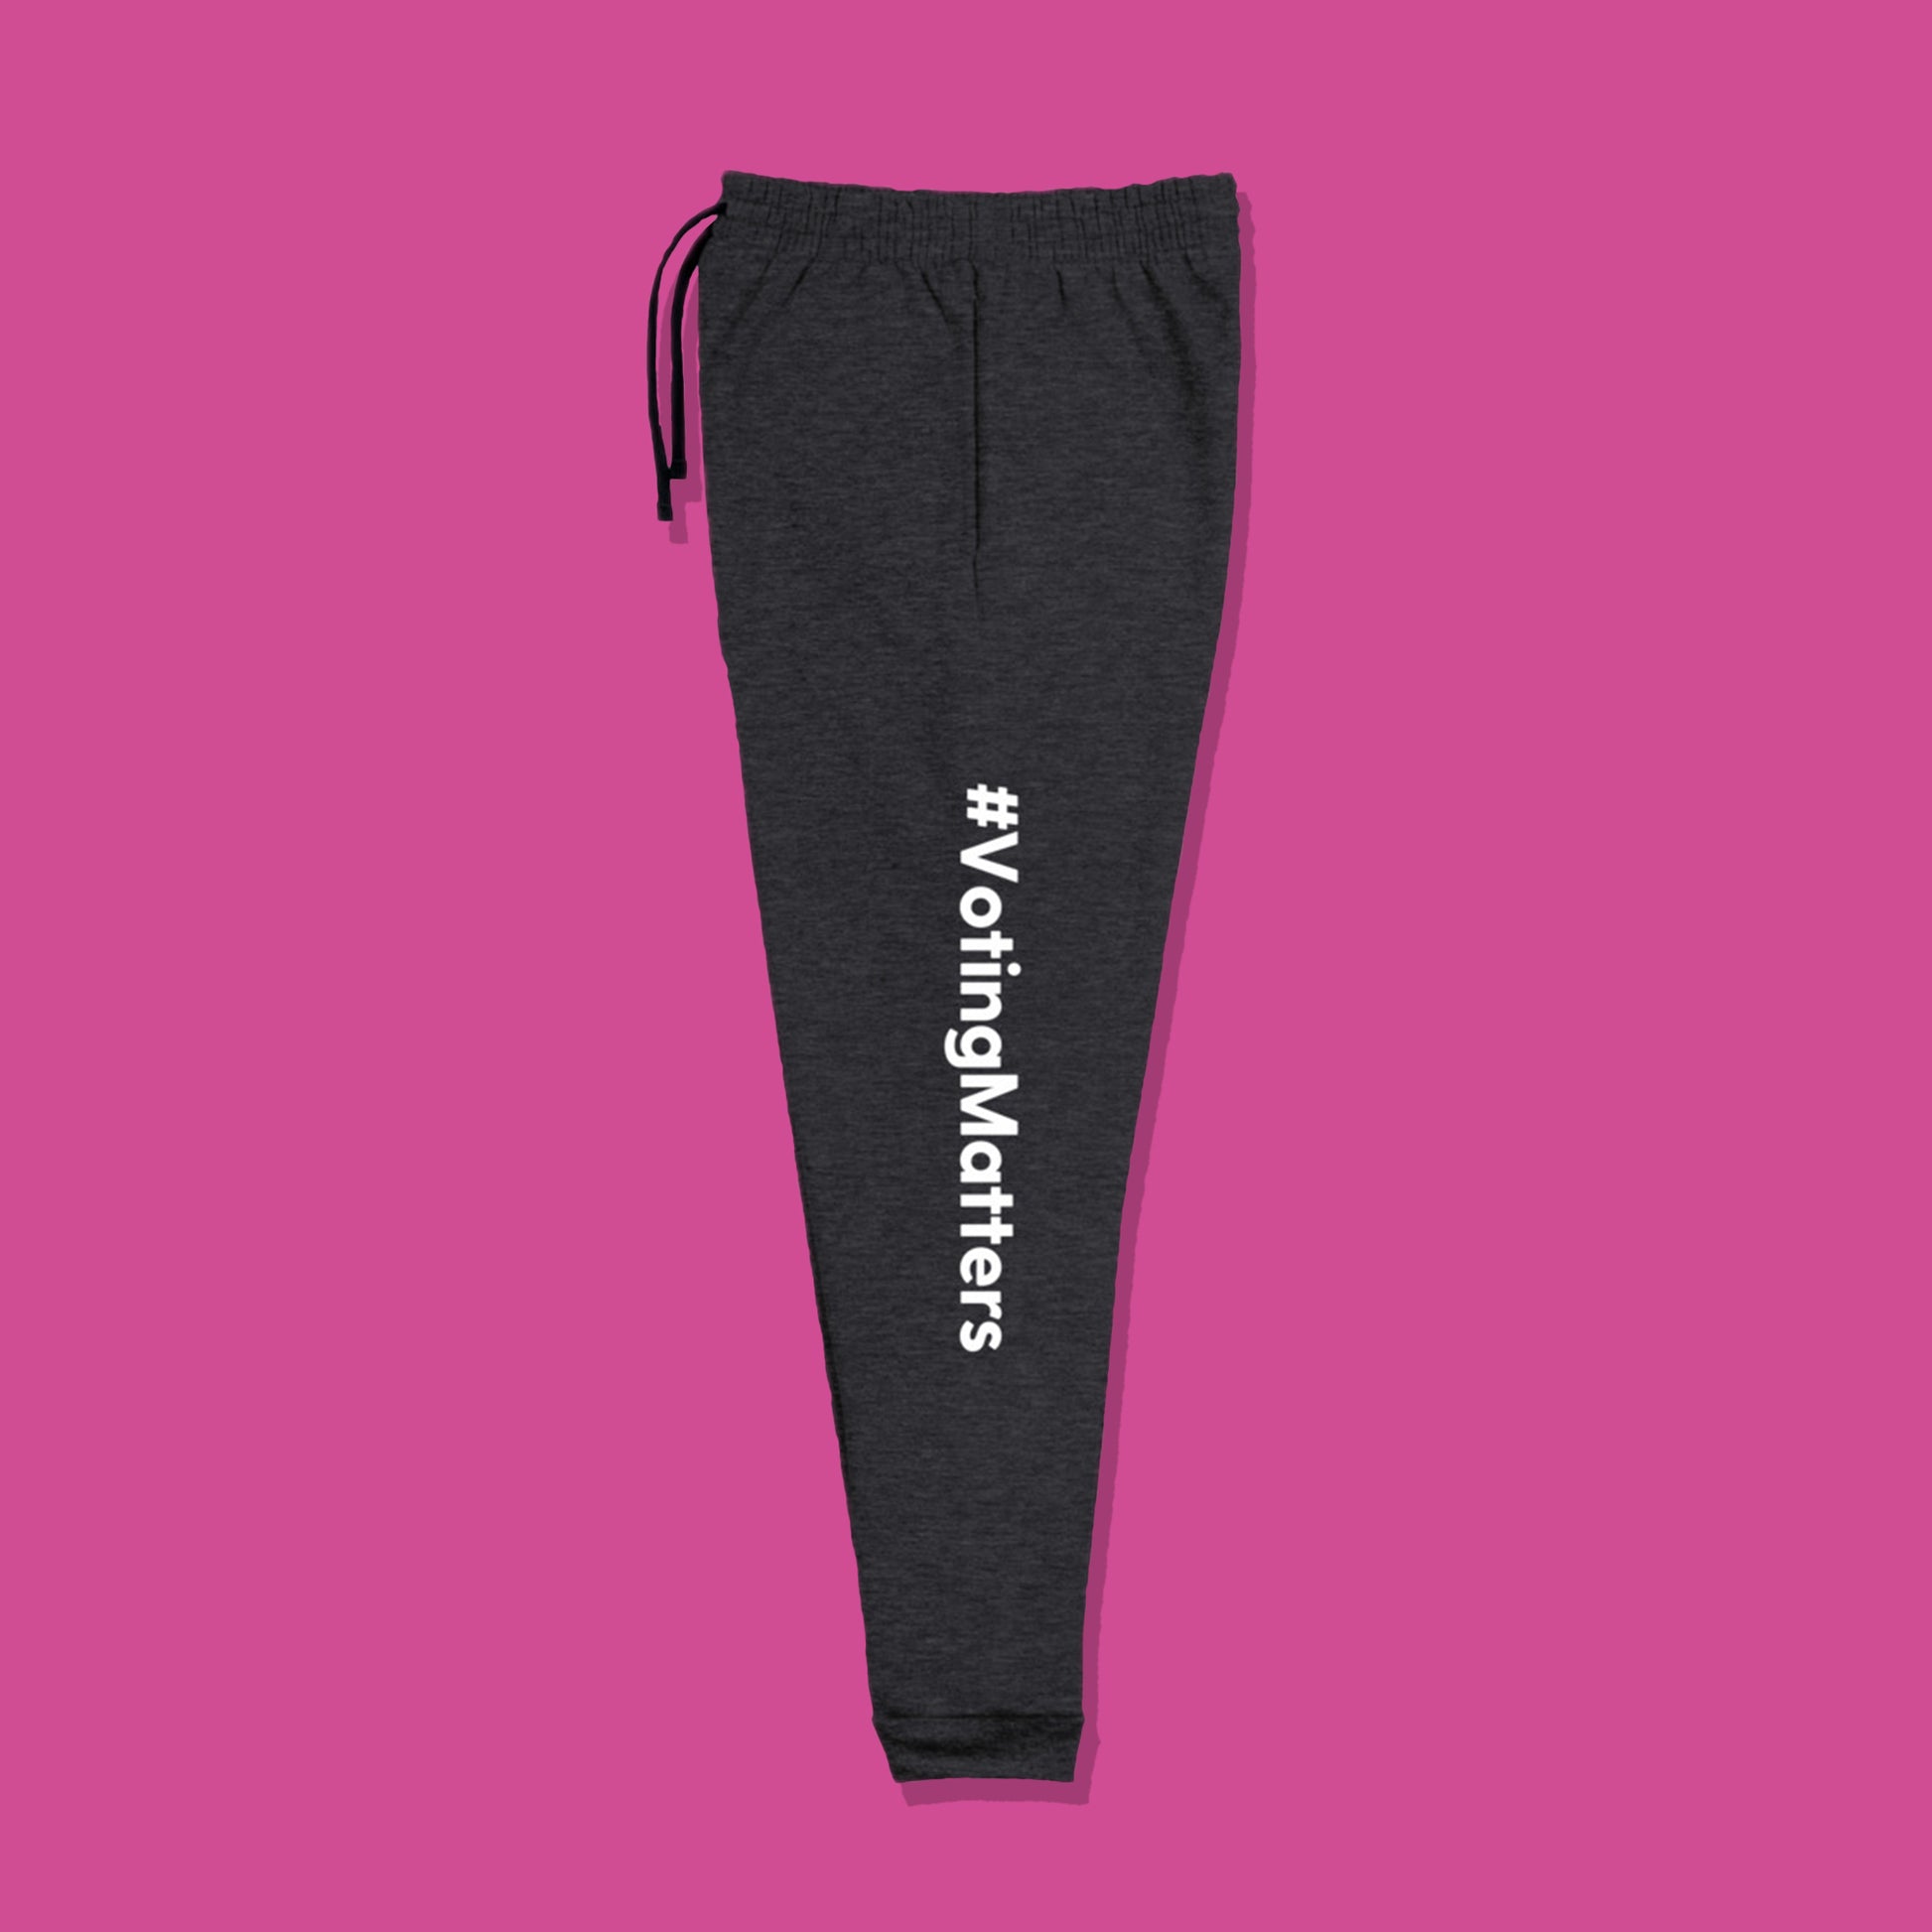 dark heather grey cotton sweatpants with hashtag voting matters printed lengthwise in white on the left leg of pants